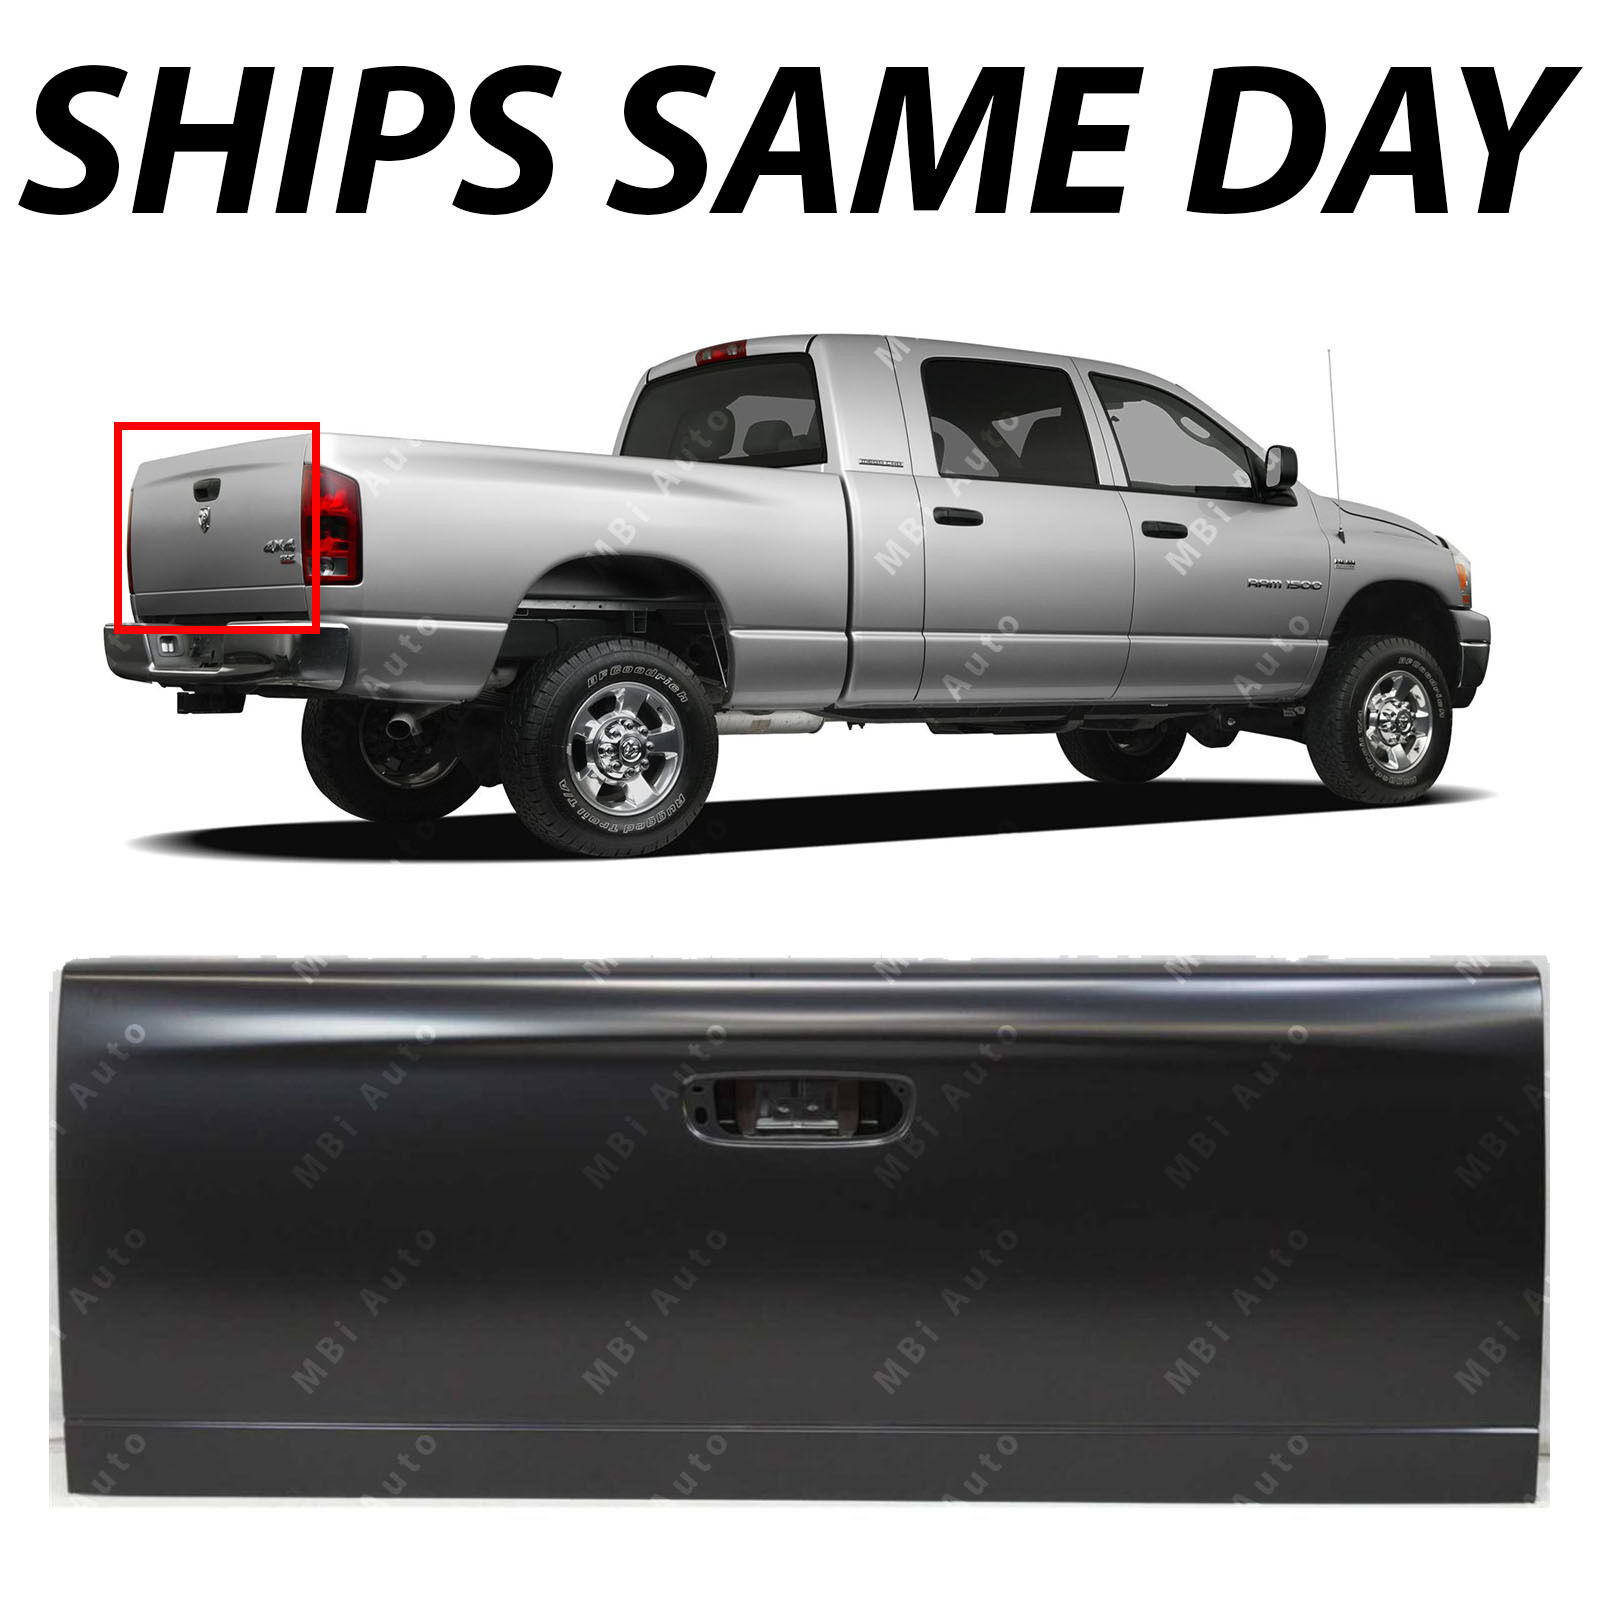 New Primered - Rear Tailgate Replacement For 2002-2008 Dodge Ram 1500 2500 3500